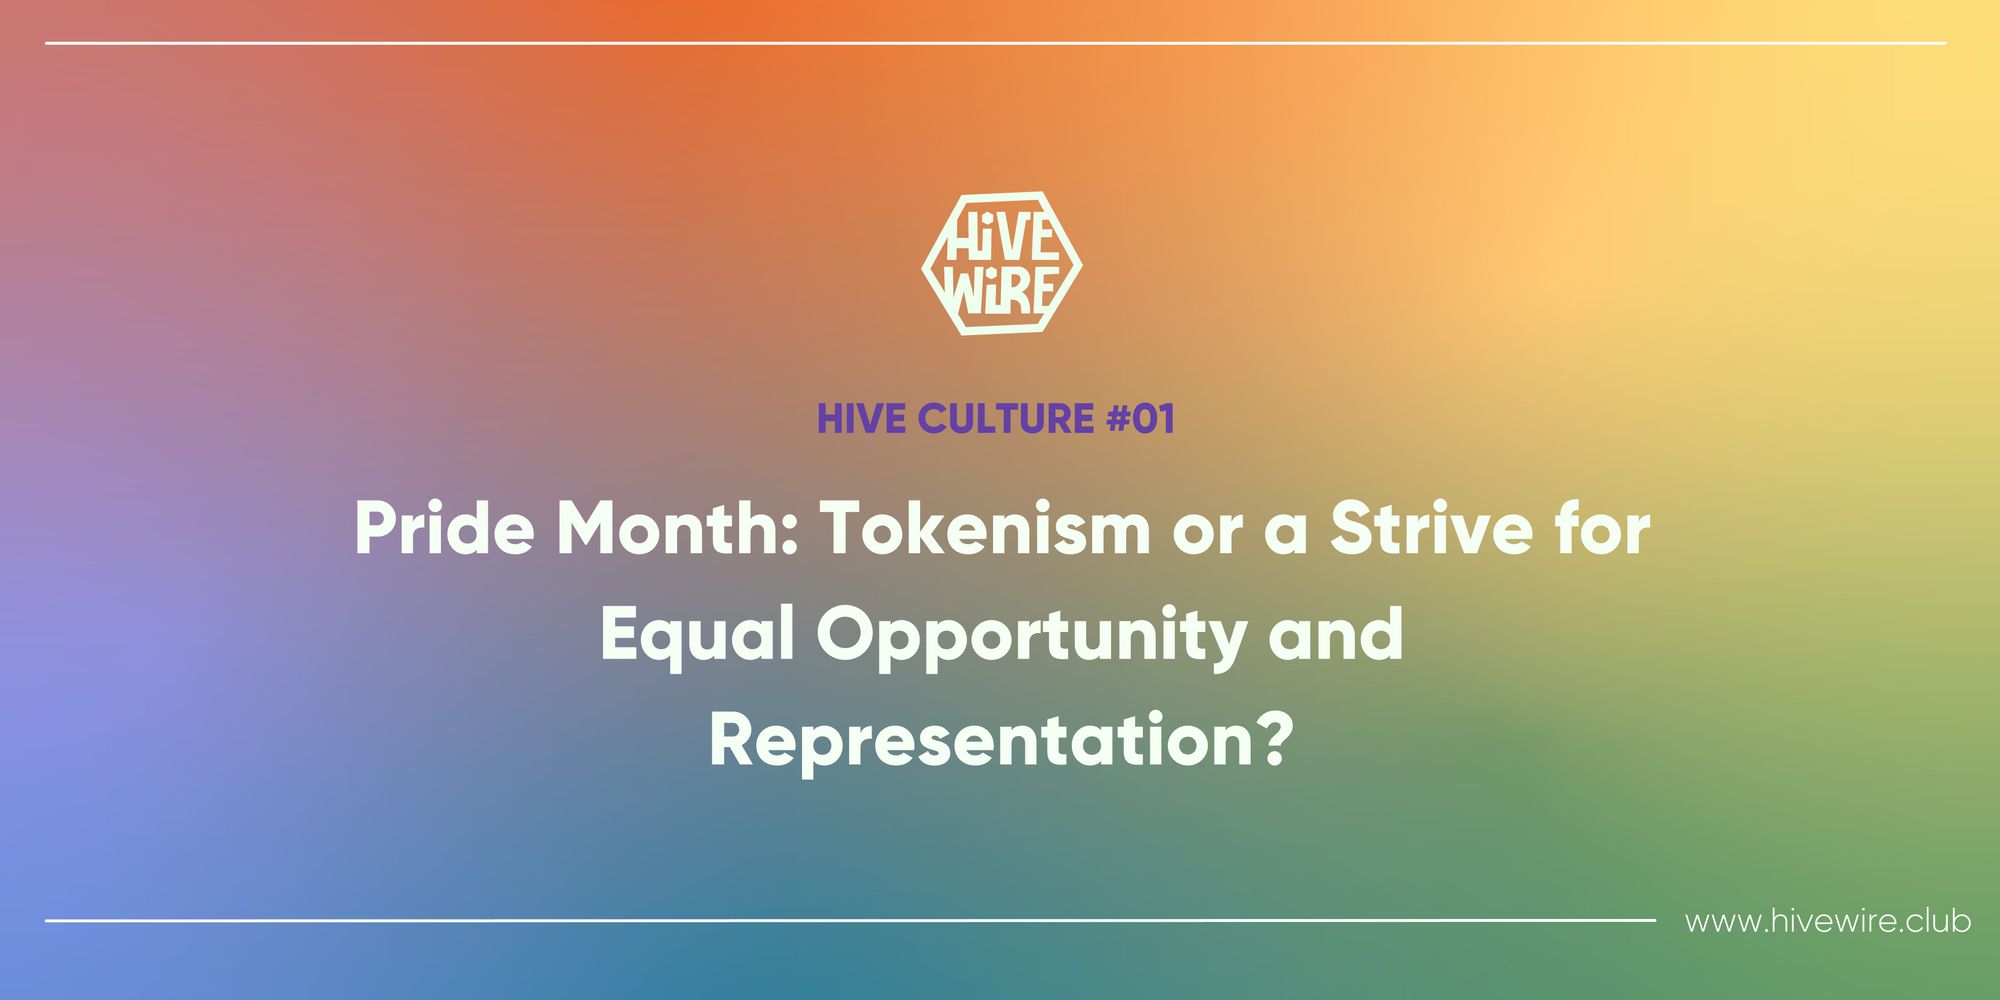 HIVE Culture #01 - Pride Month: Tokenism or a Strive for Equal Opportunity and Representation?